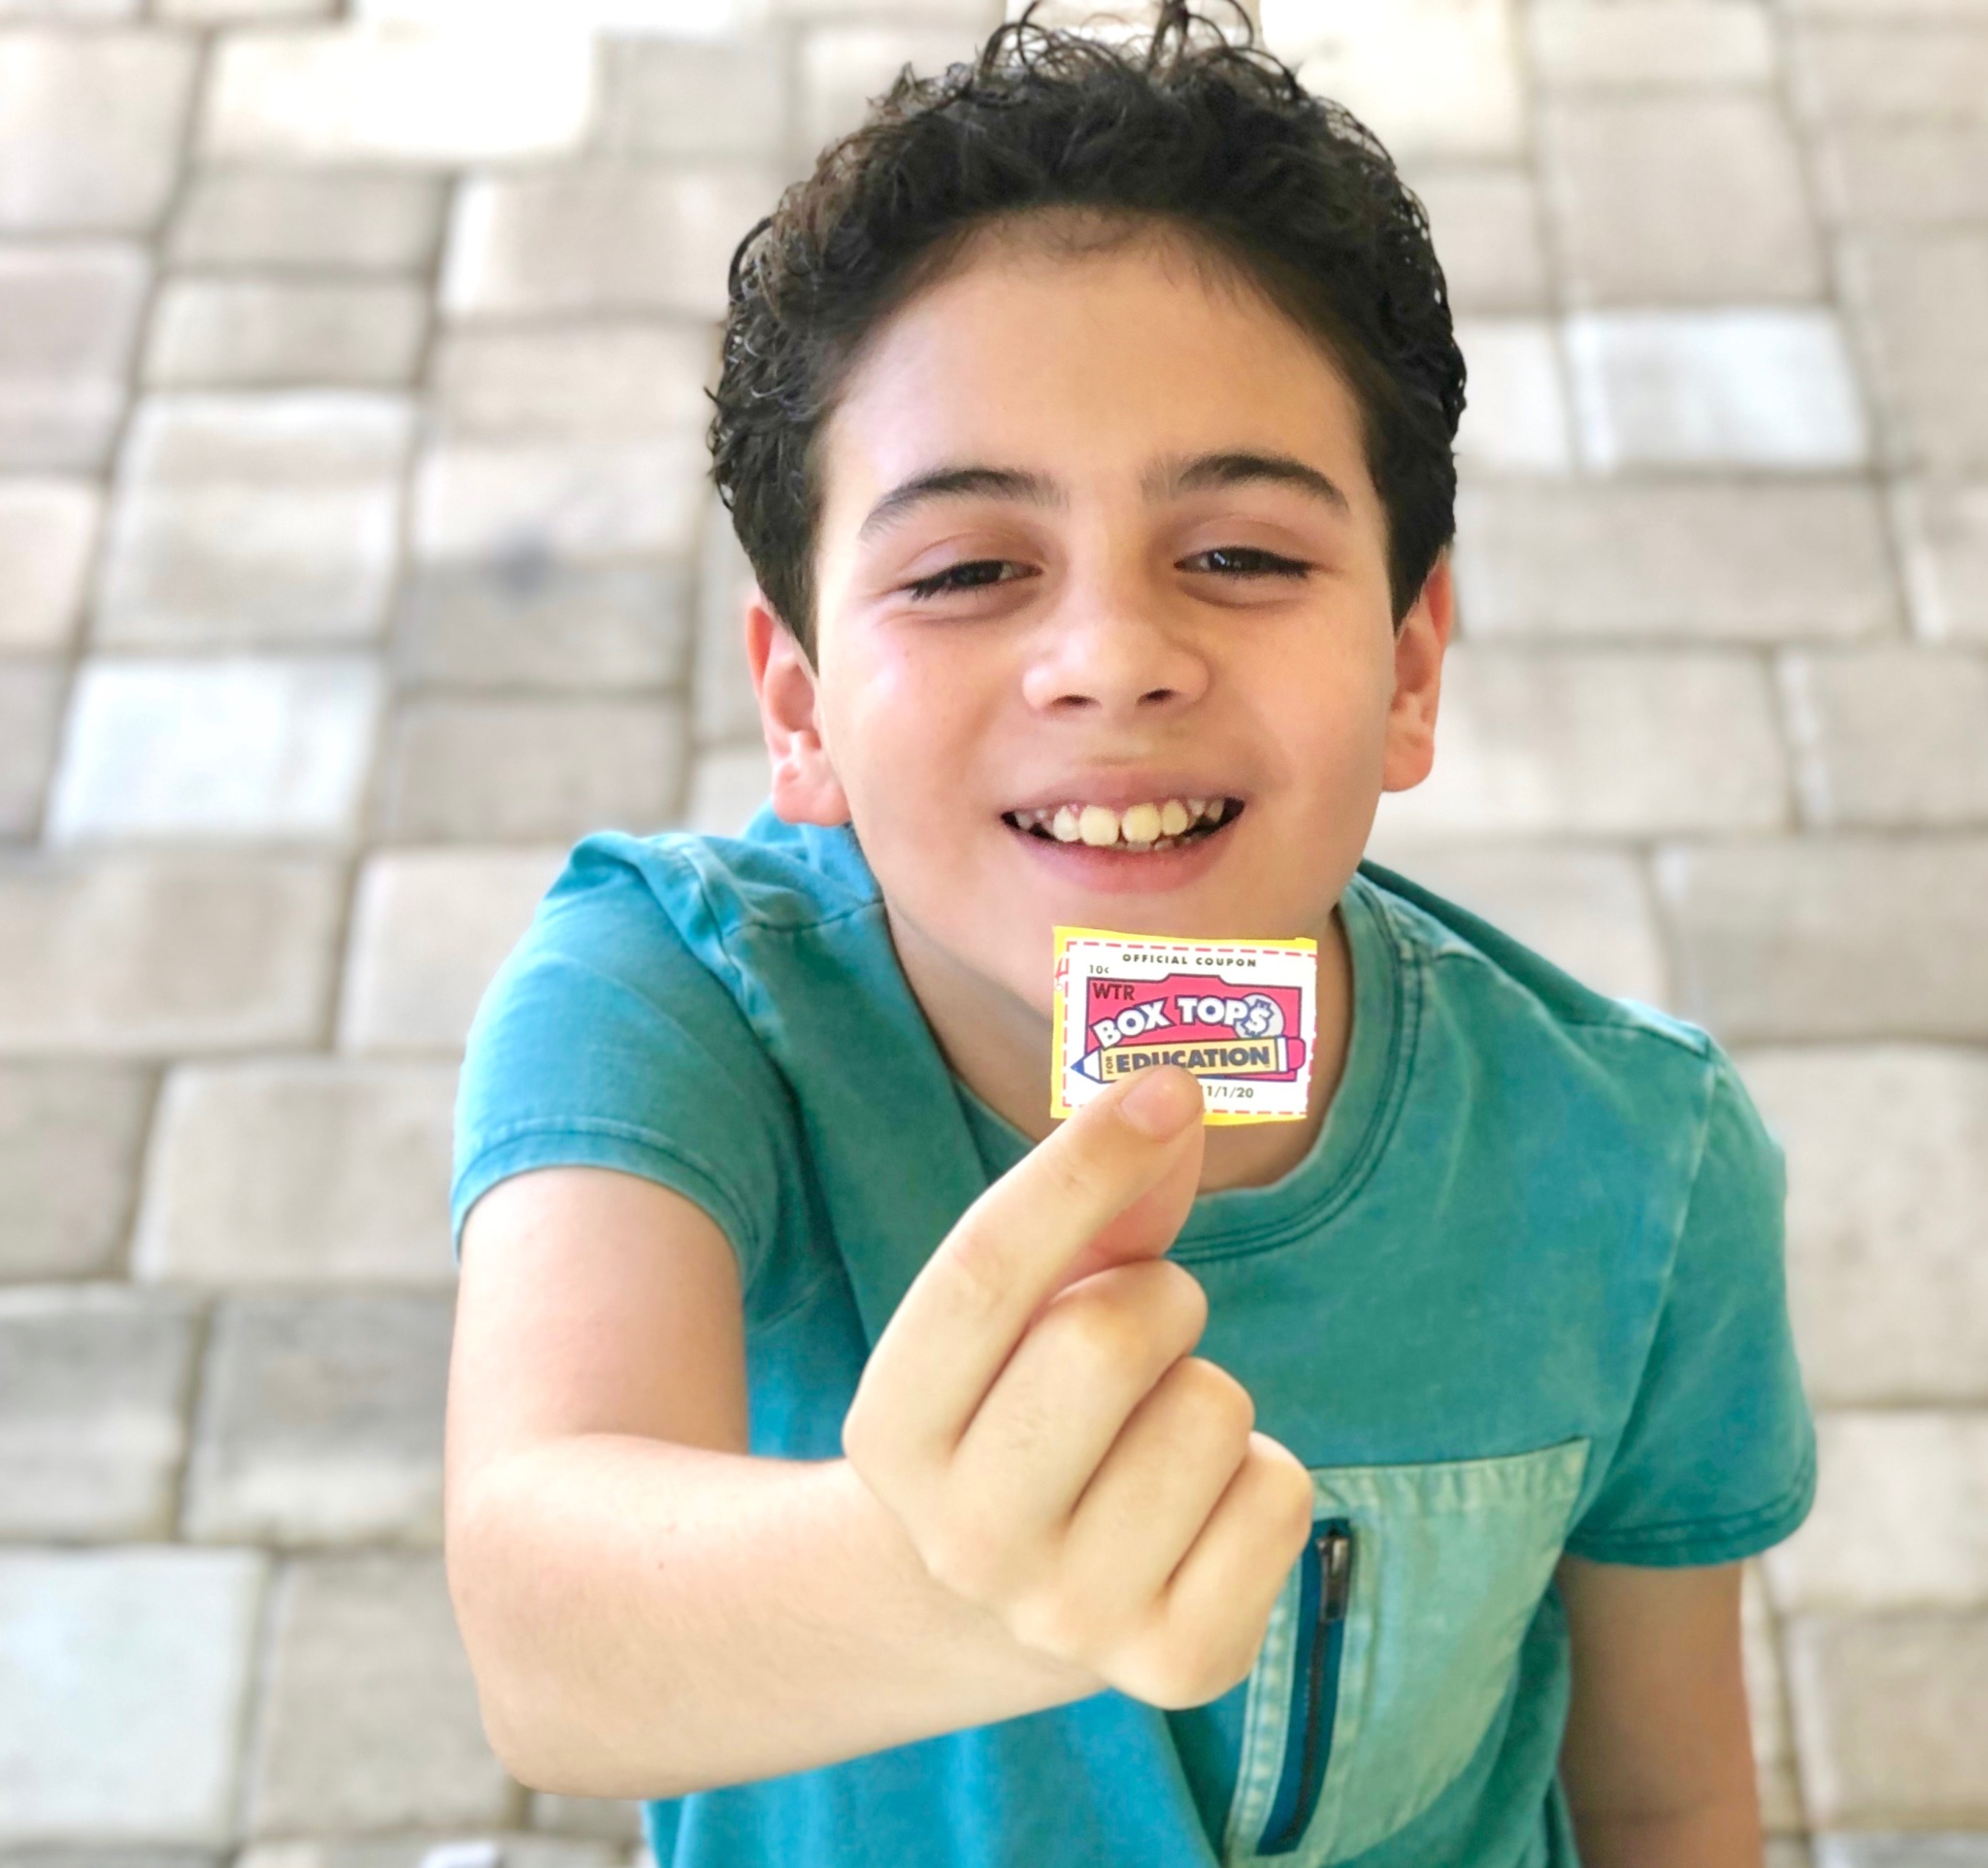 Ways to support your school with BoxTops